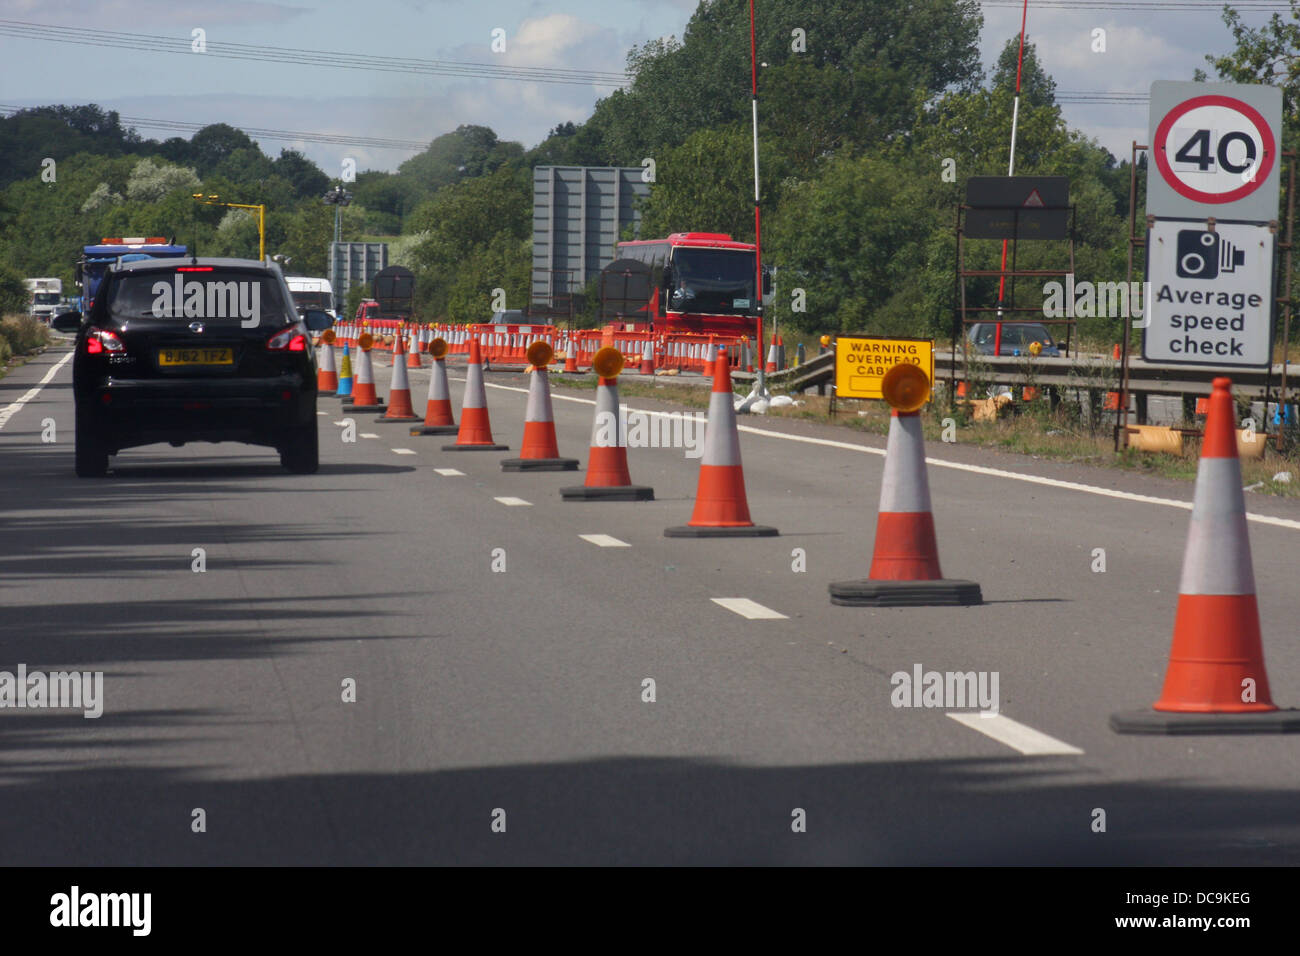 Roadworks and lane coned off on M40 Stock Photo